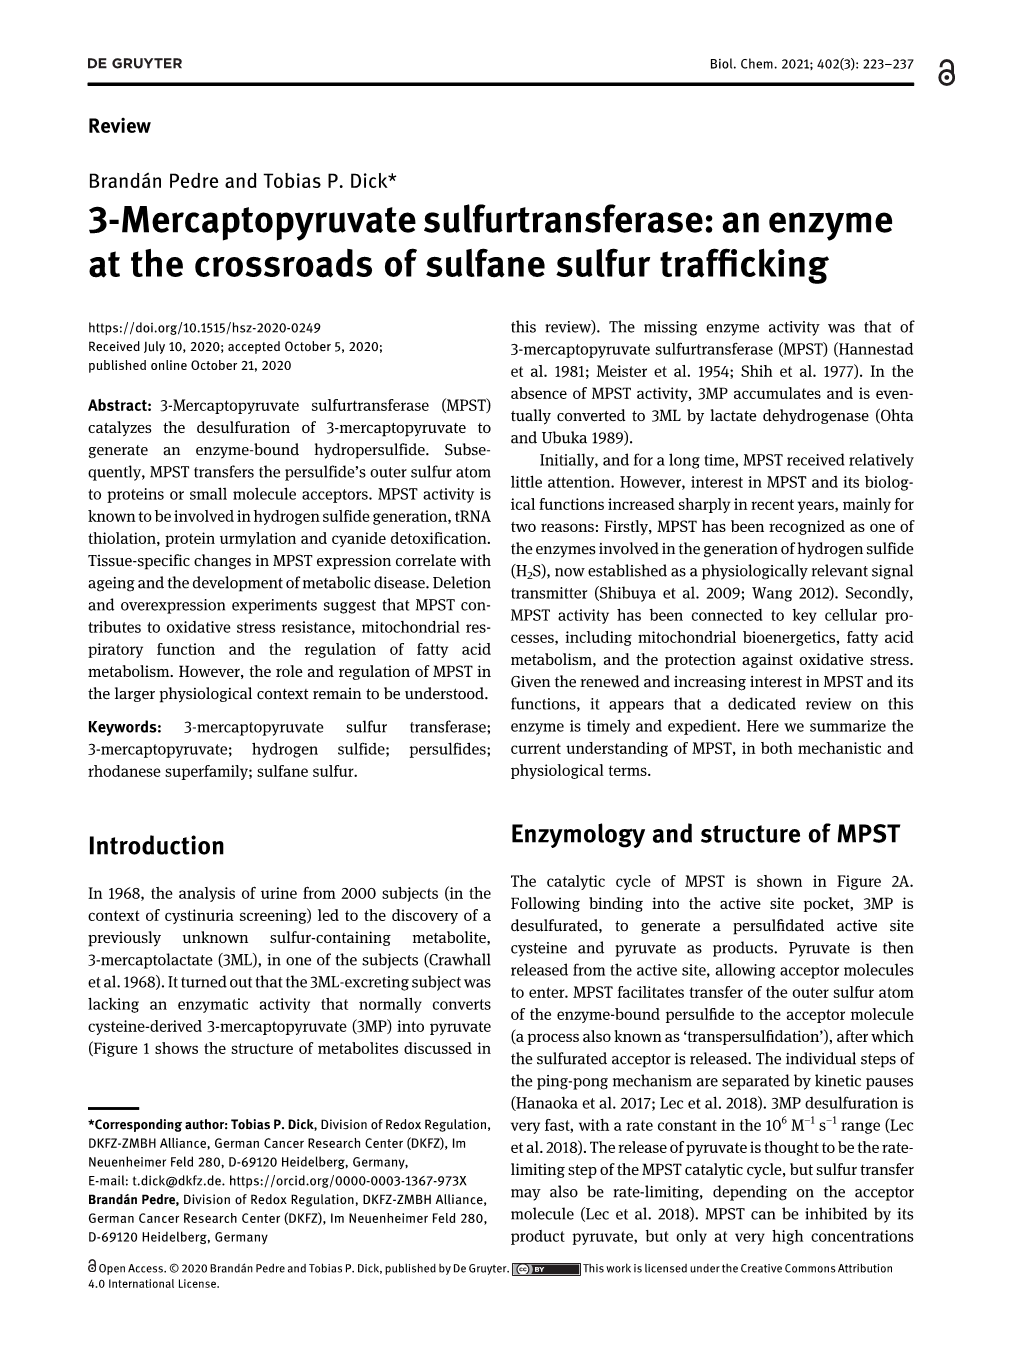 3-Mercaptopyruvate Sulfurtransferase: an Enzyme at the Crossroads of Sulfane Sulfur Trafﬁcking This Review)